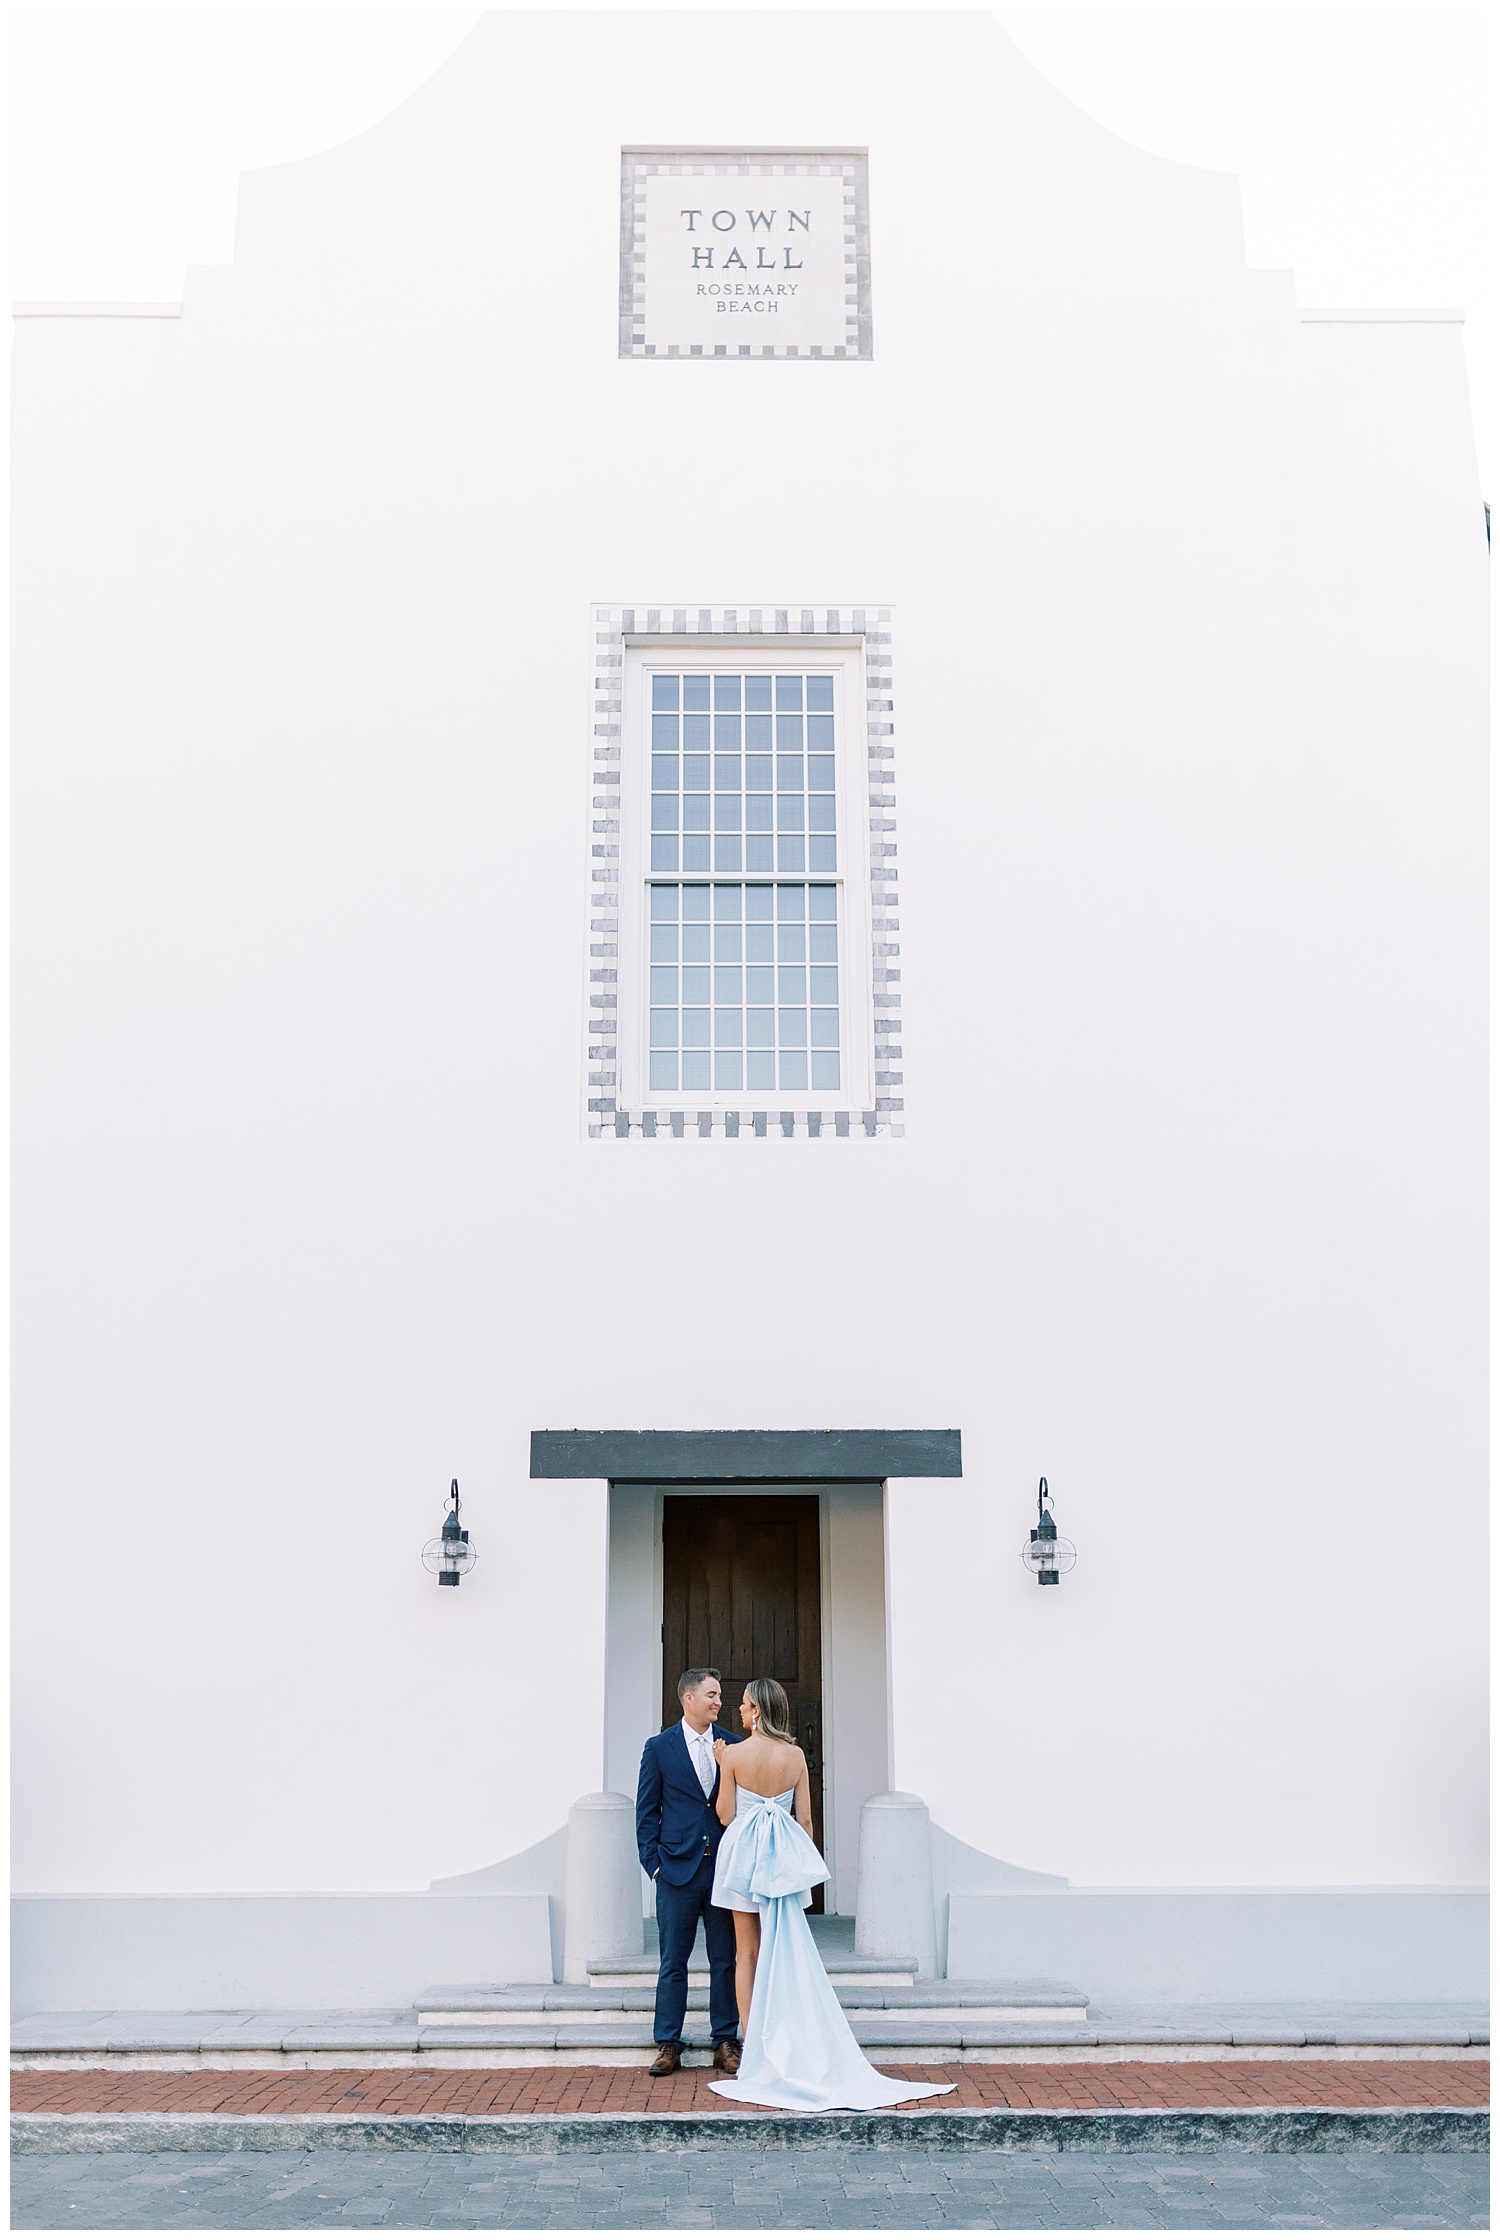 Engagement session photo in front of town hall at Rosemary Beach, Florida